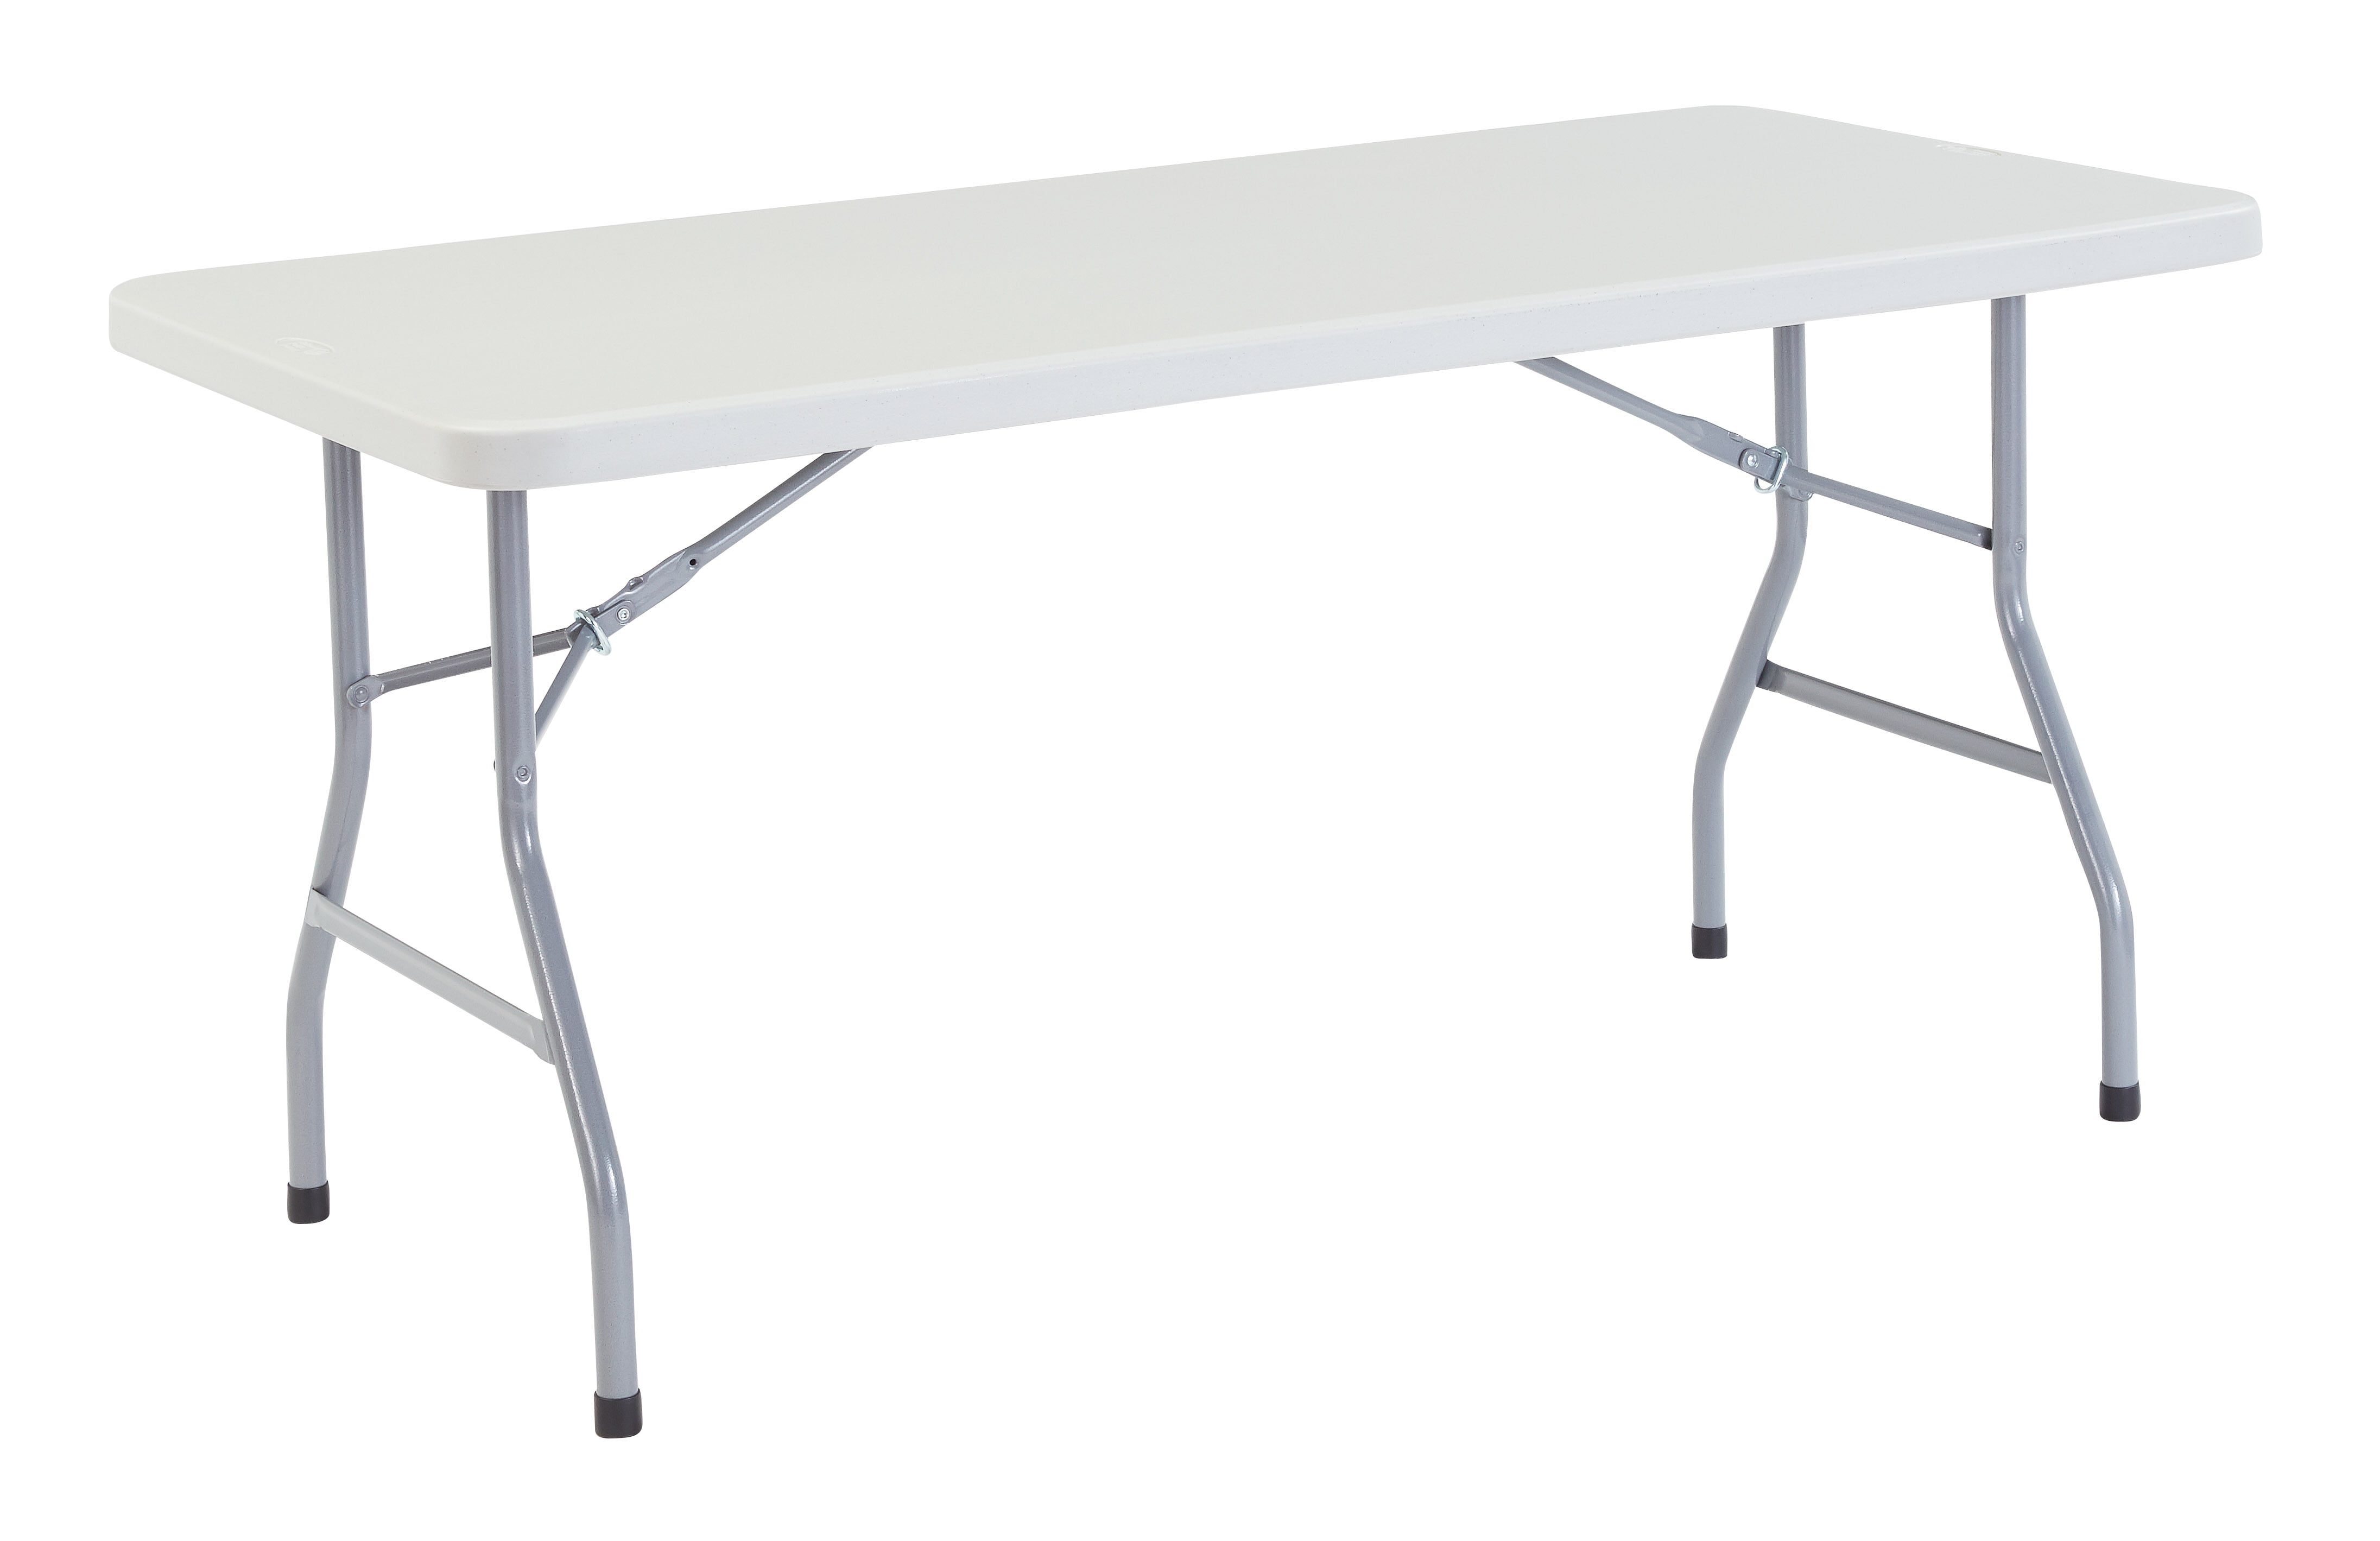 Black Folding Table Dolly for 30 W X 72 D Rectangular Tables for sale online 